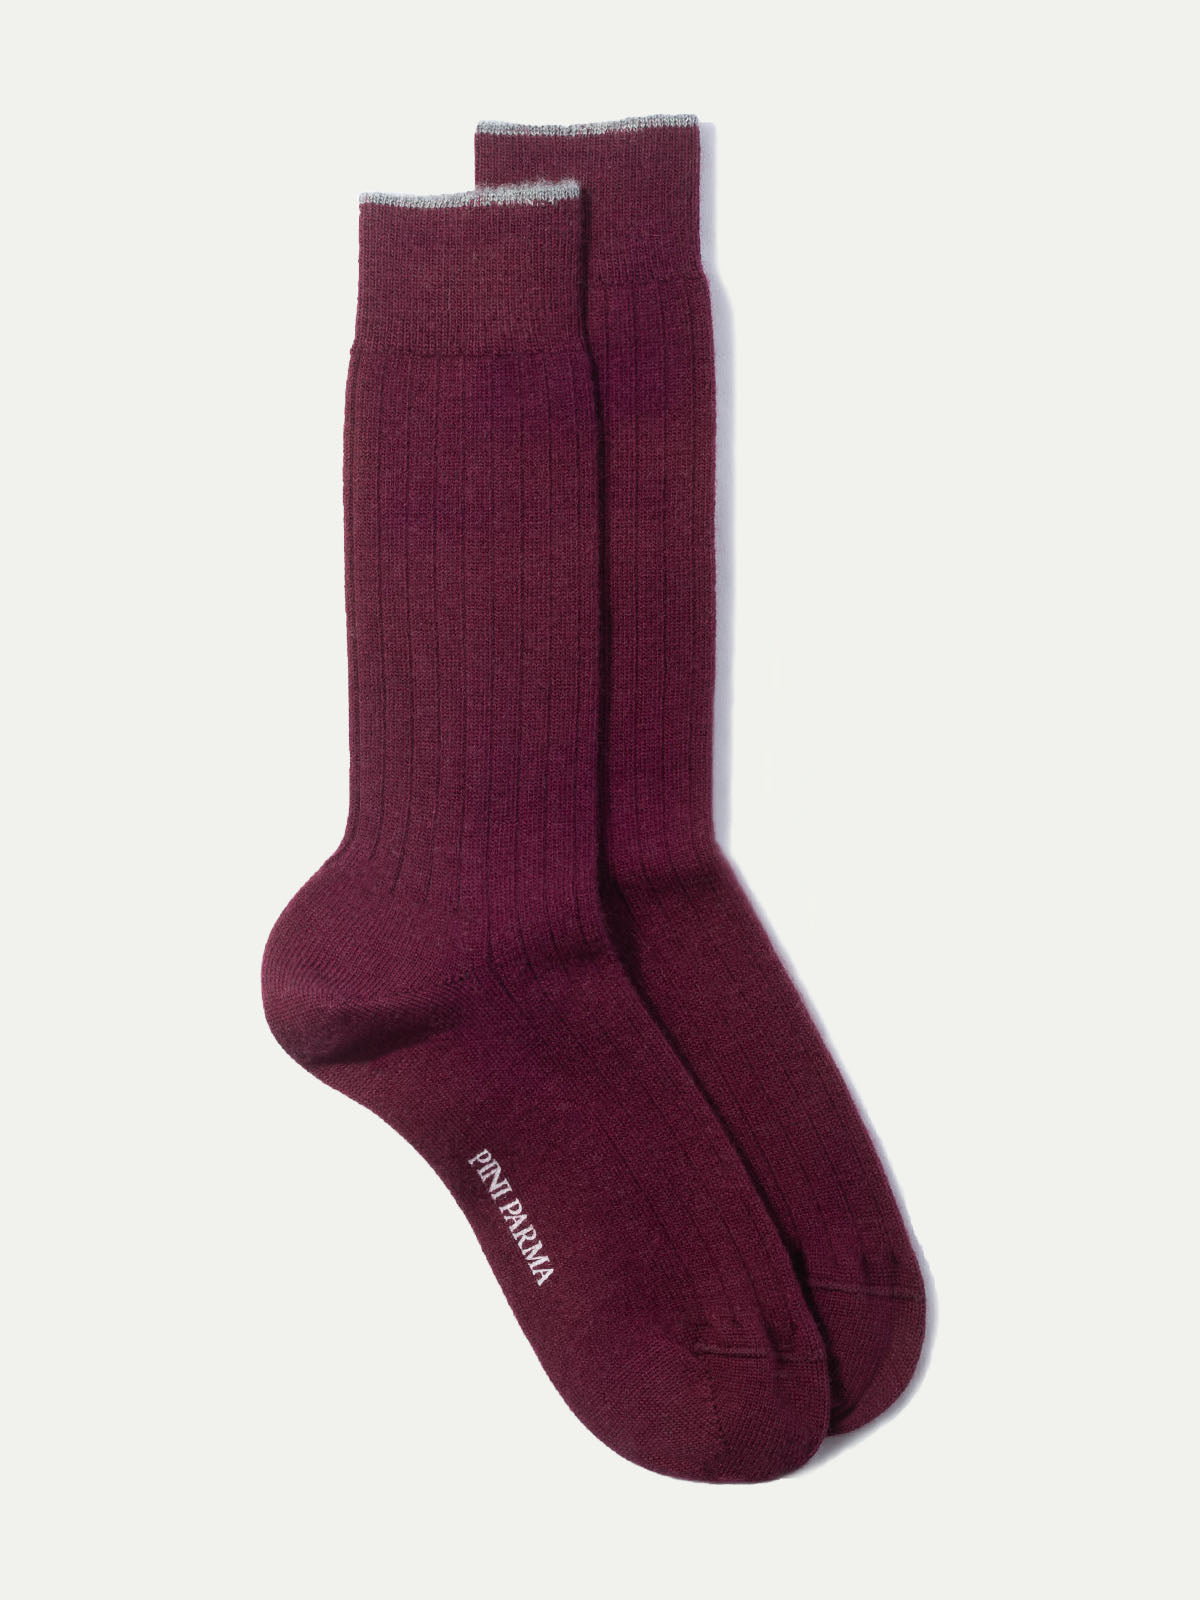 Bordeaux - Super durable Wool short socks - Made in Italy